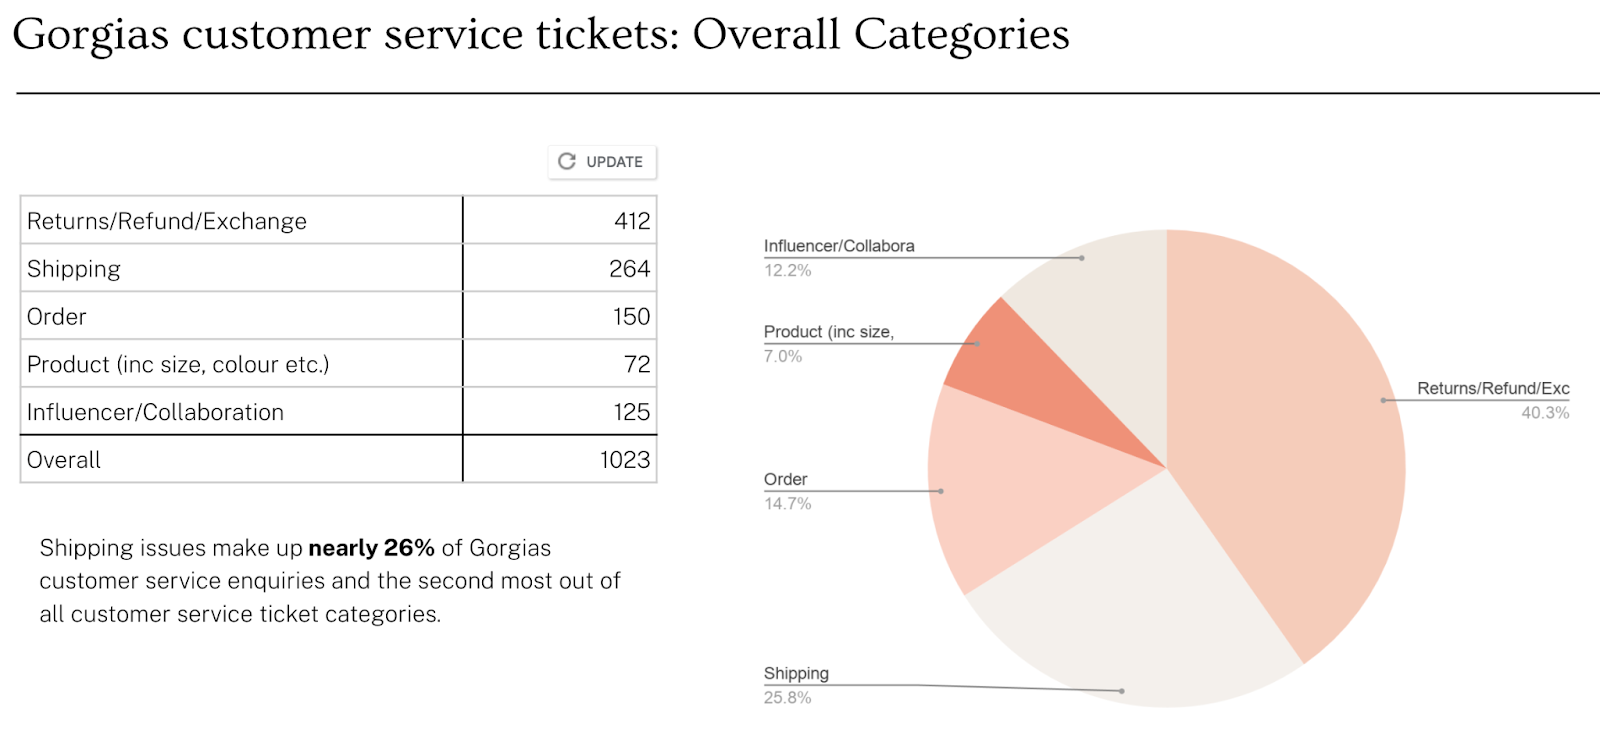 Screenshot of a pie chart showing percentage of categories for customer service tickets. 